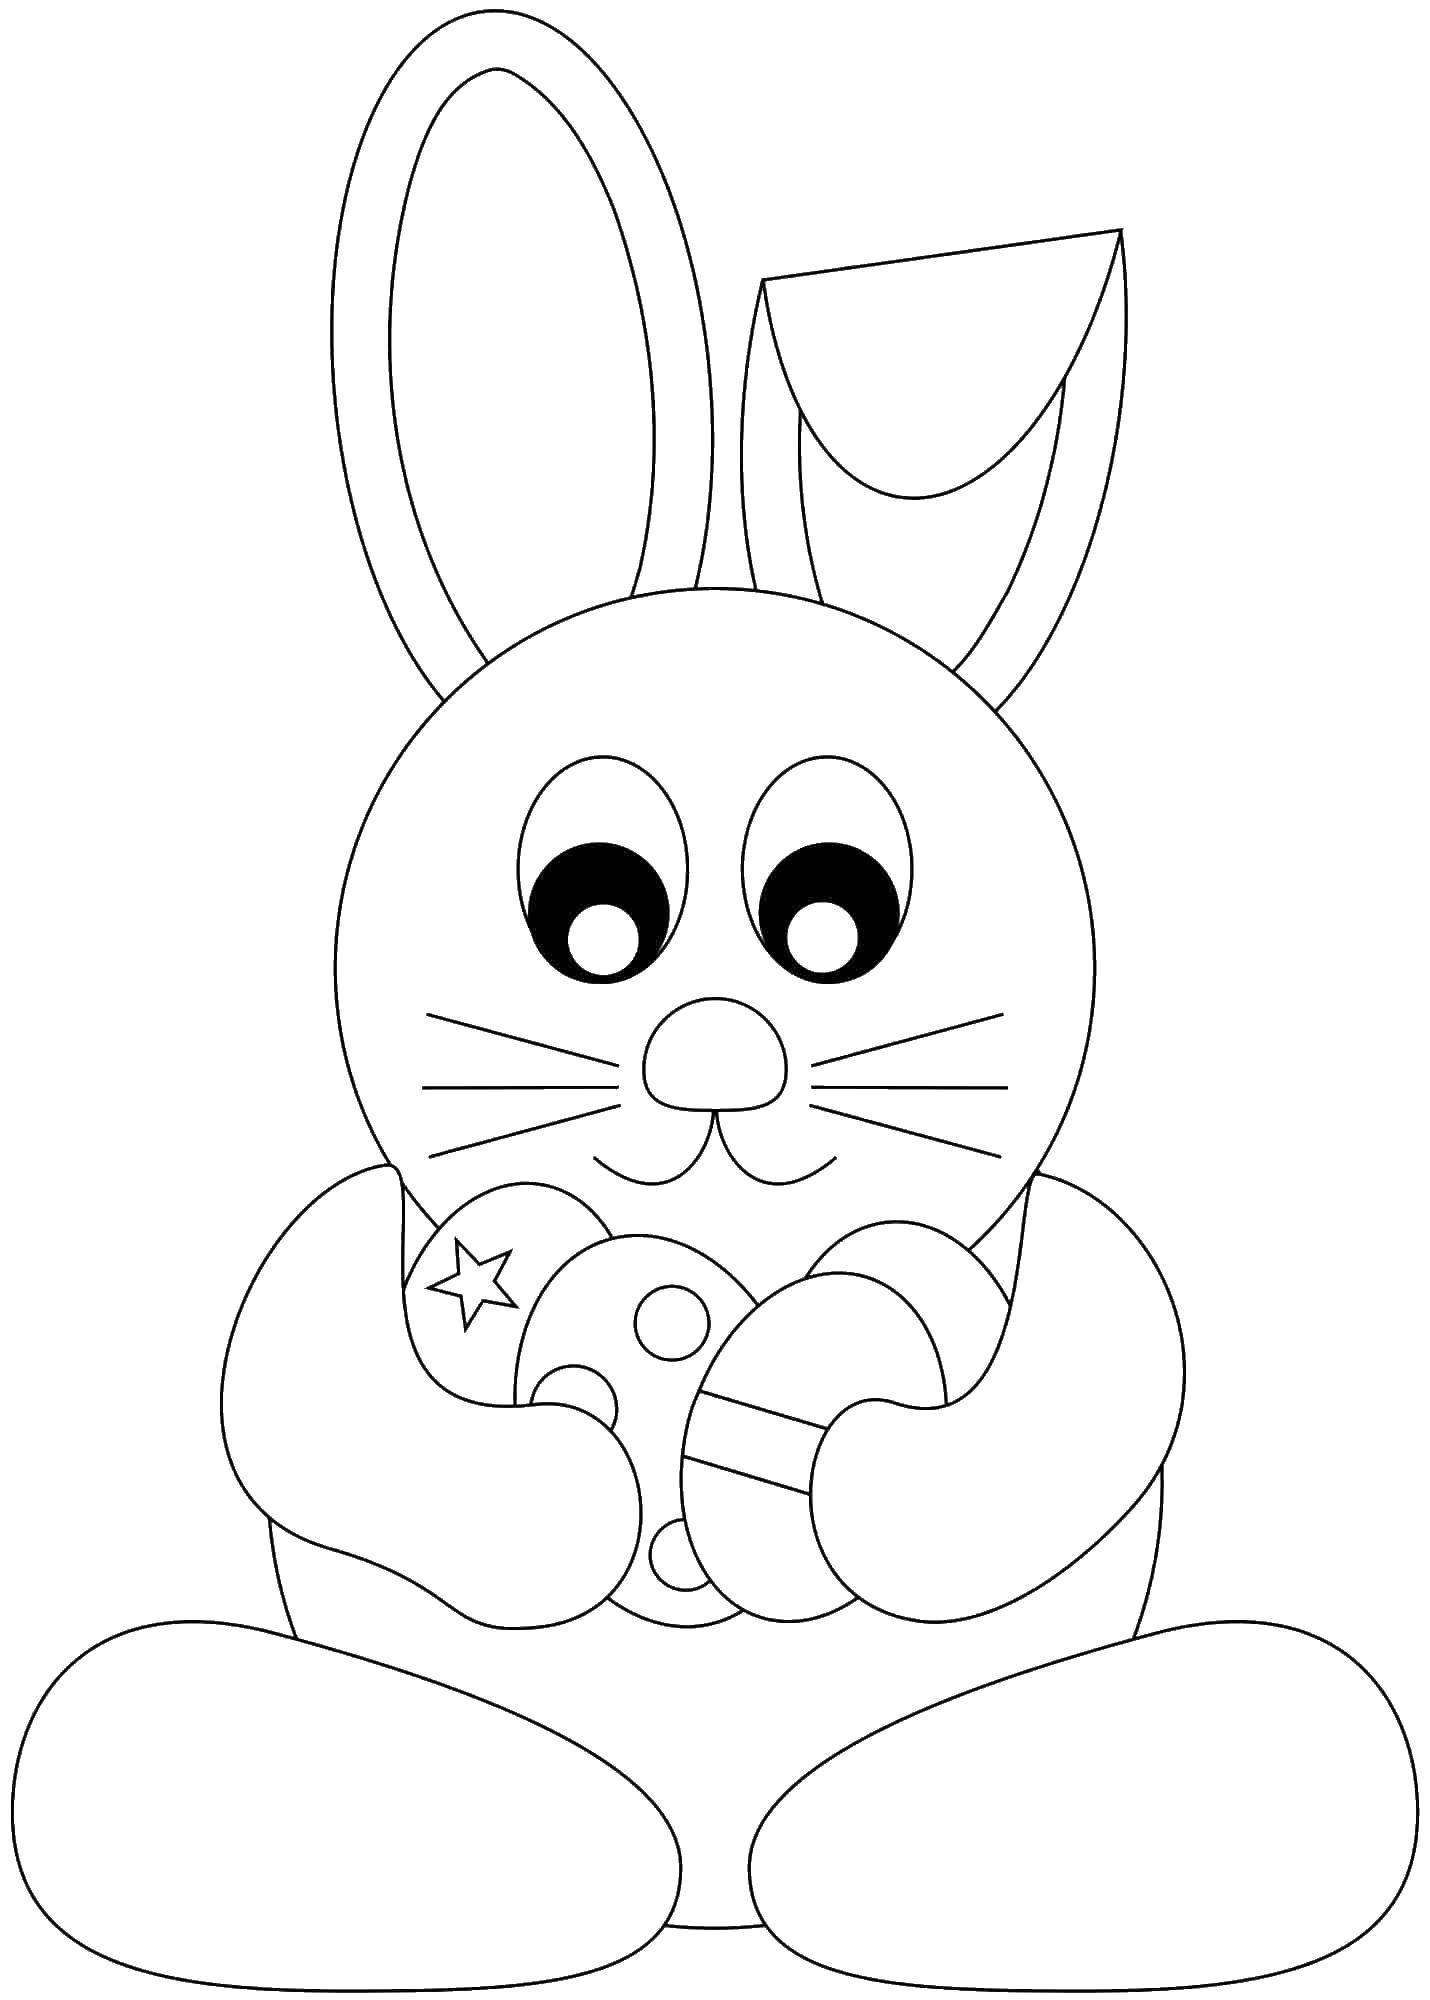 Coloring The Easter Bunny. Category the rabbit. Tags:  Easter, eggs, rabbit.